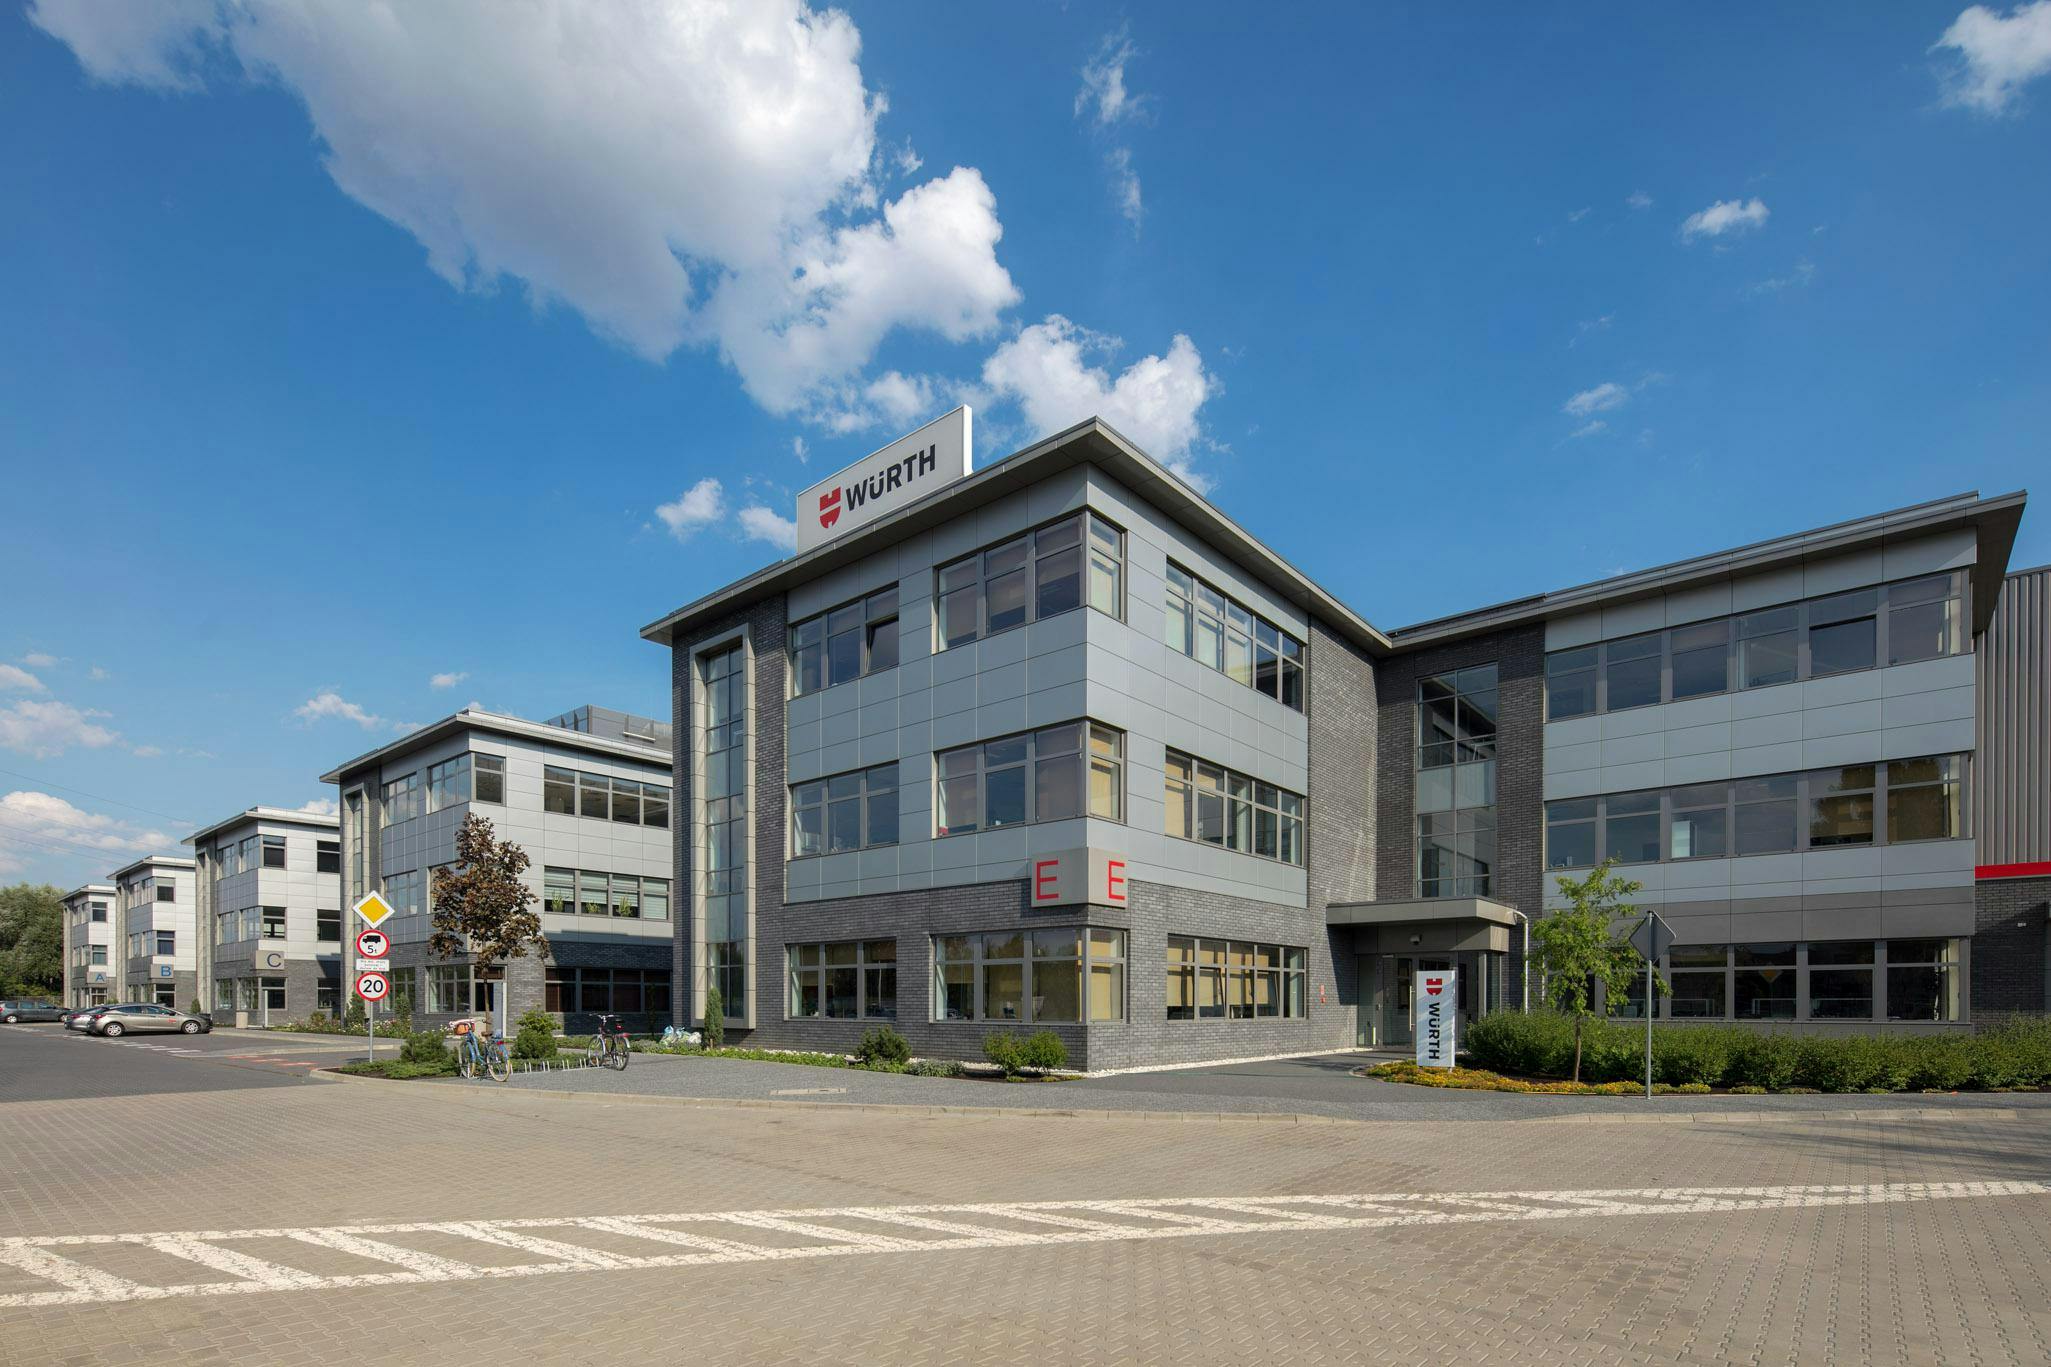 Offices for rent in Offices Diamond Business Park Ursus - Budynek J #2